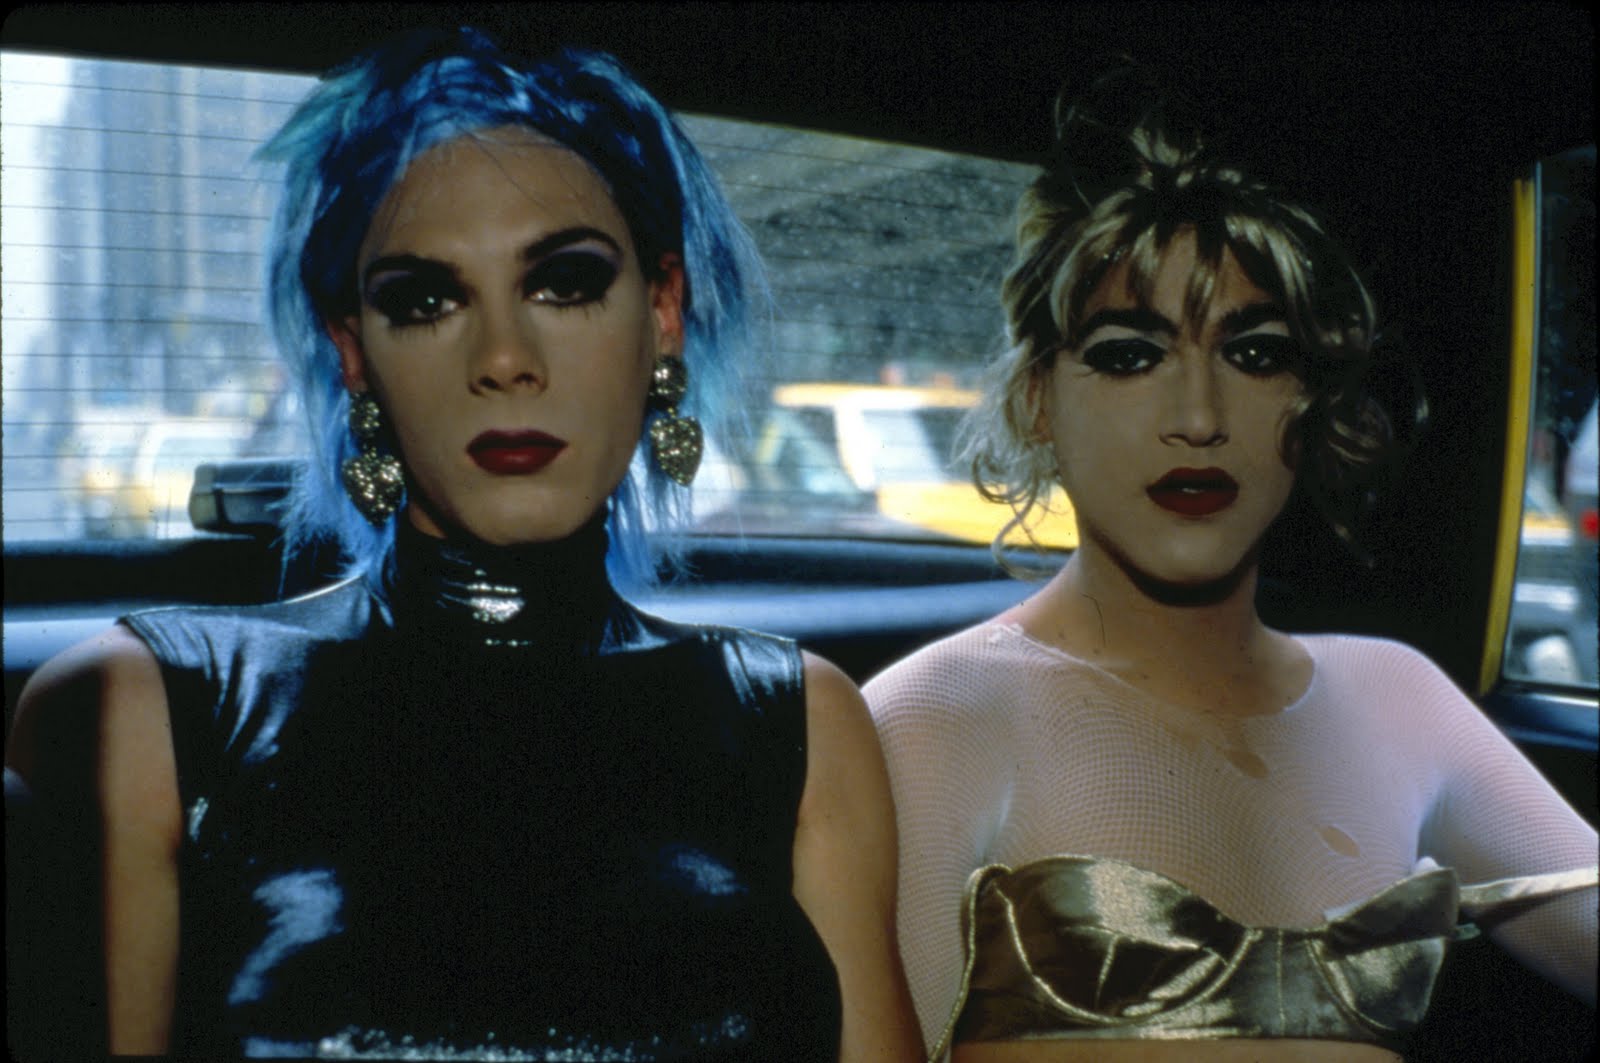 A couple of drag queens are looking directly to the camera, they seem to be in a cab